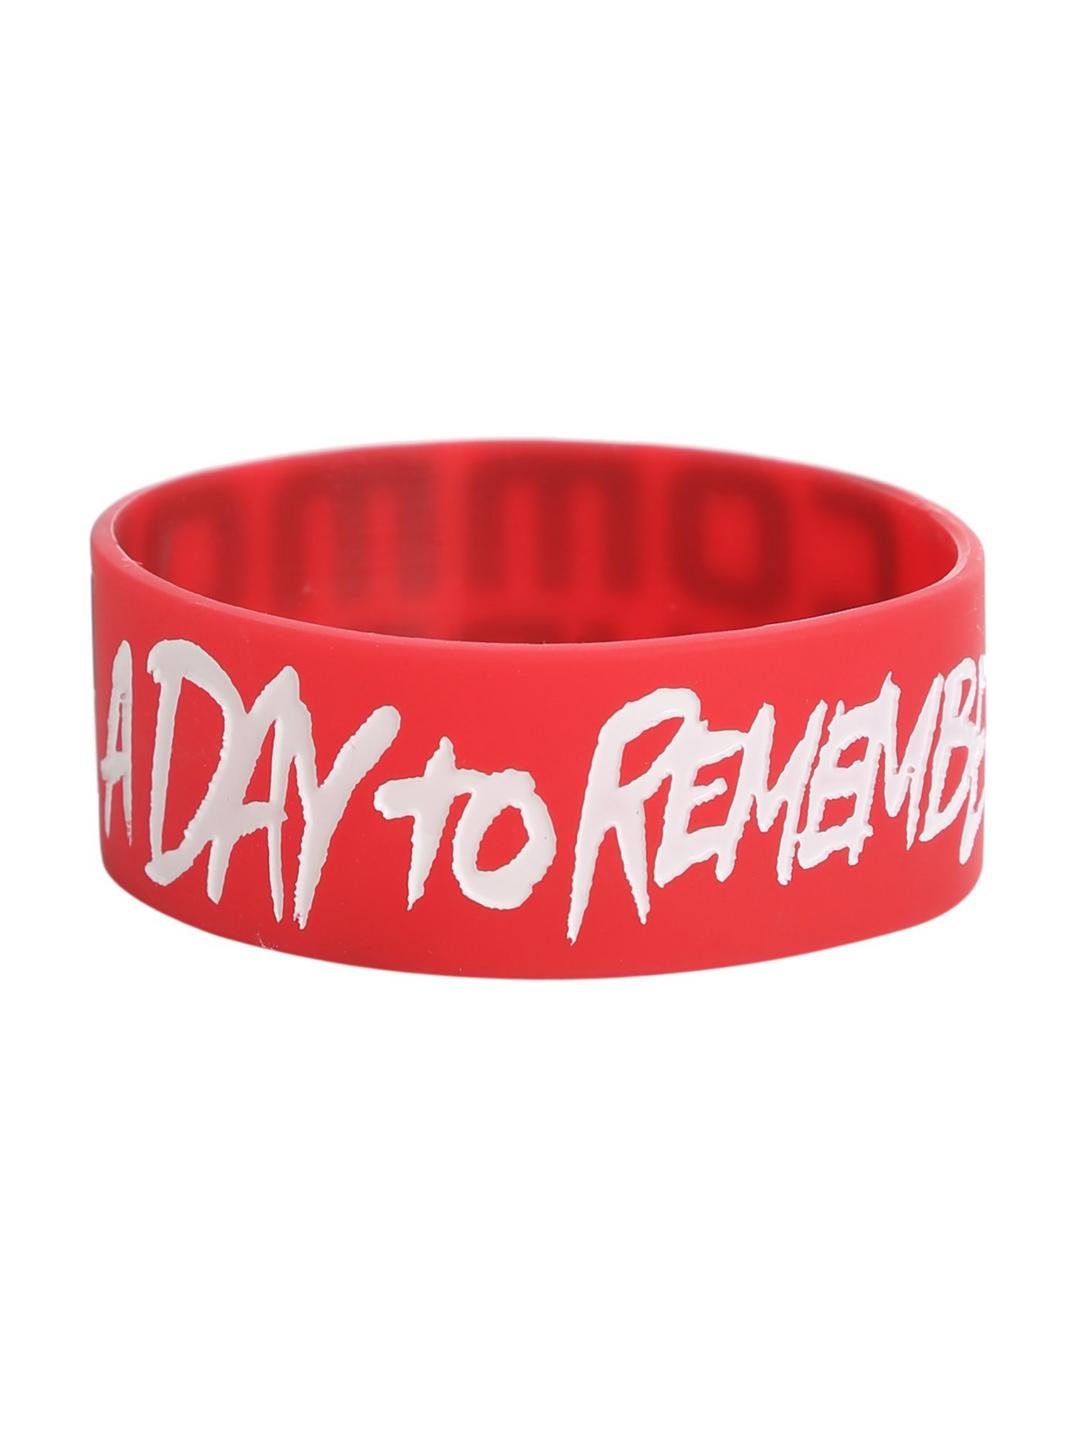 A Day To Remember Common Courtesy Rubber Bracelet, , hi-res